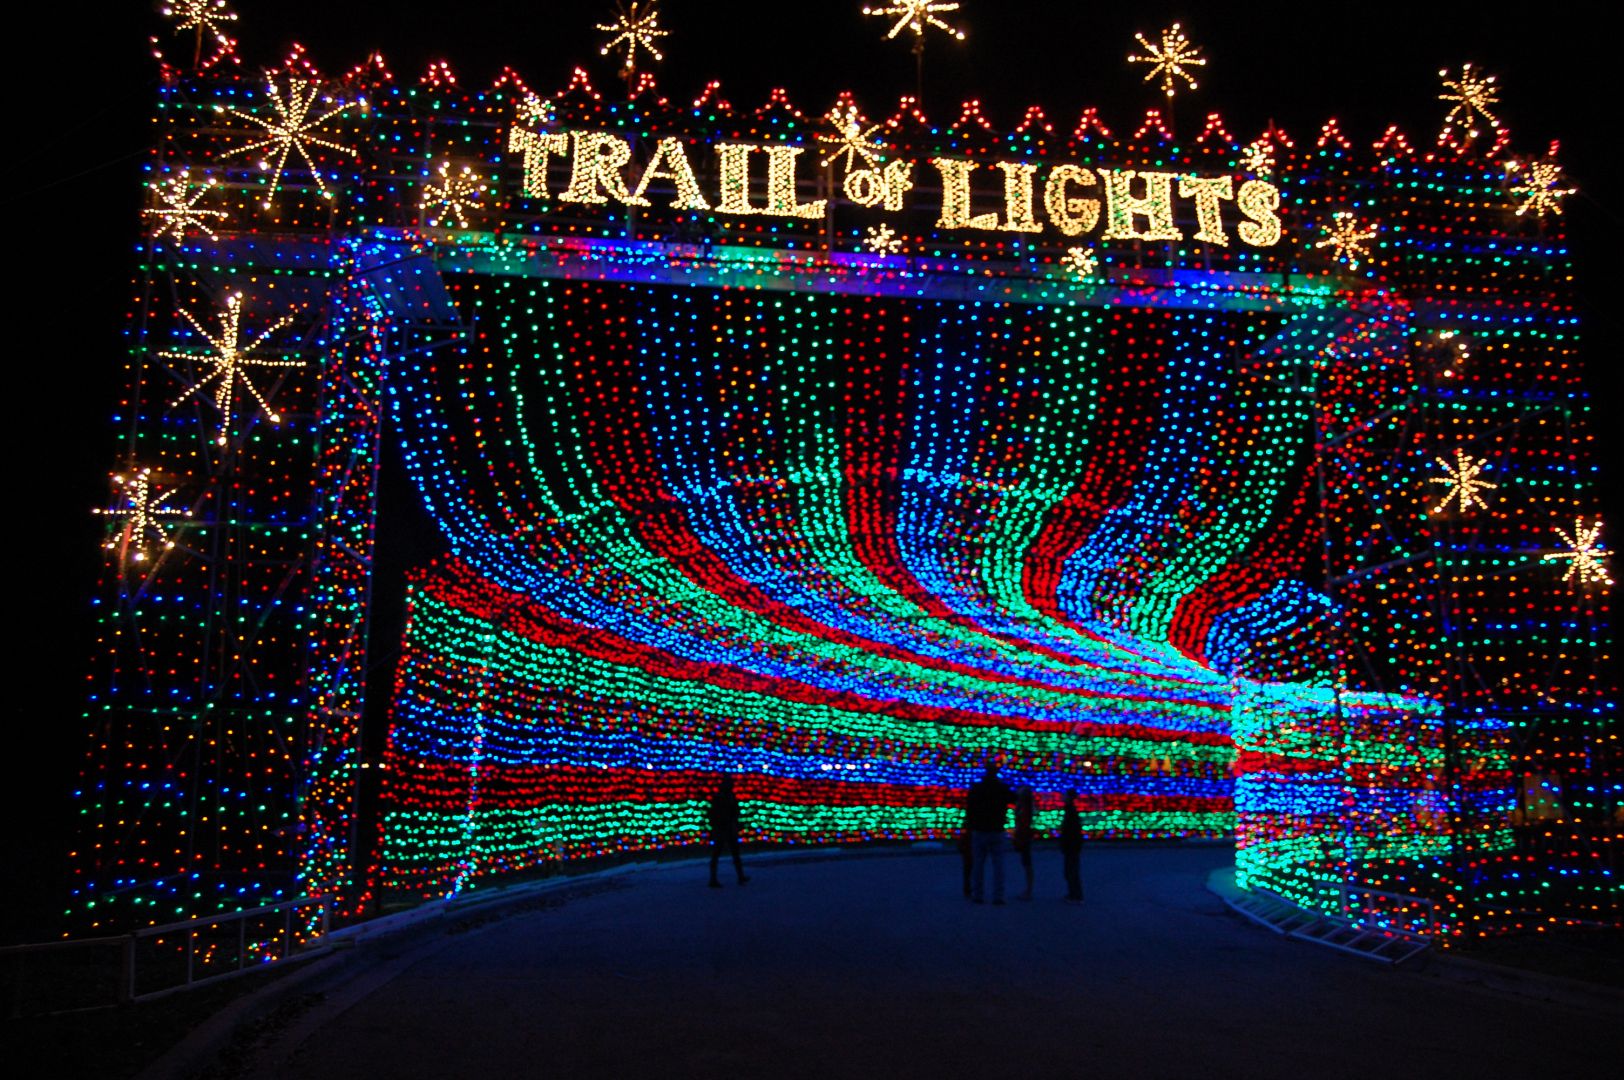 The is a picture of the Austin Trail of Lights